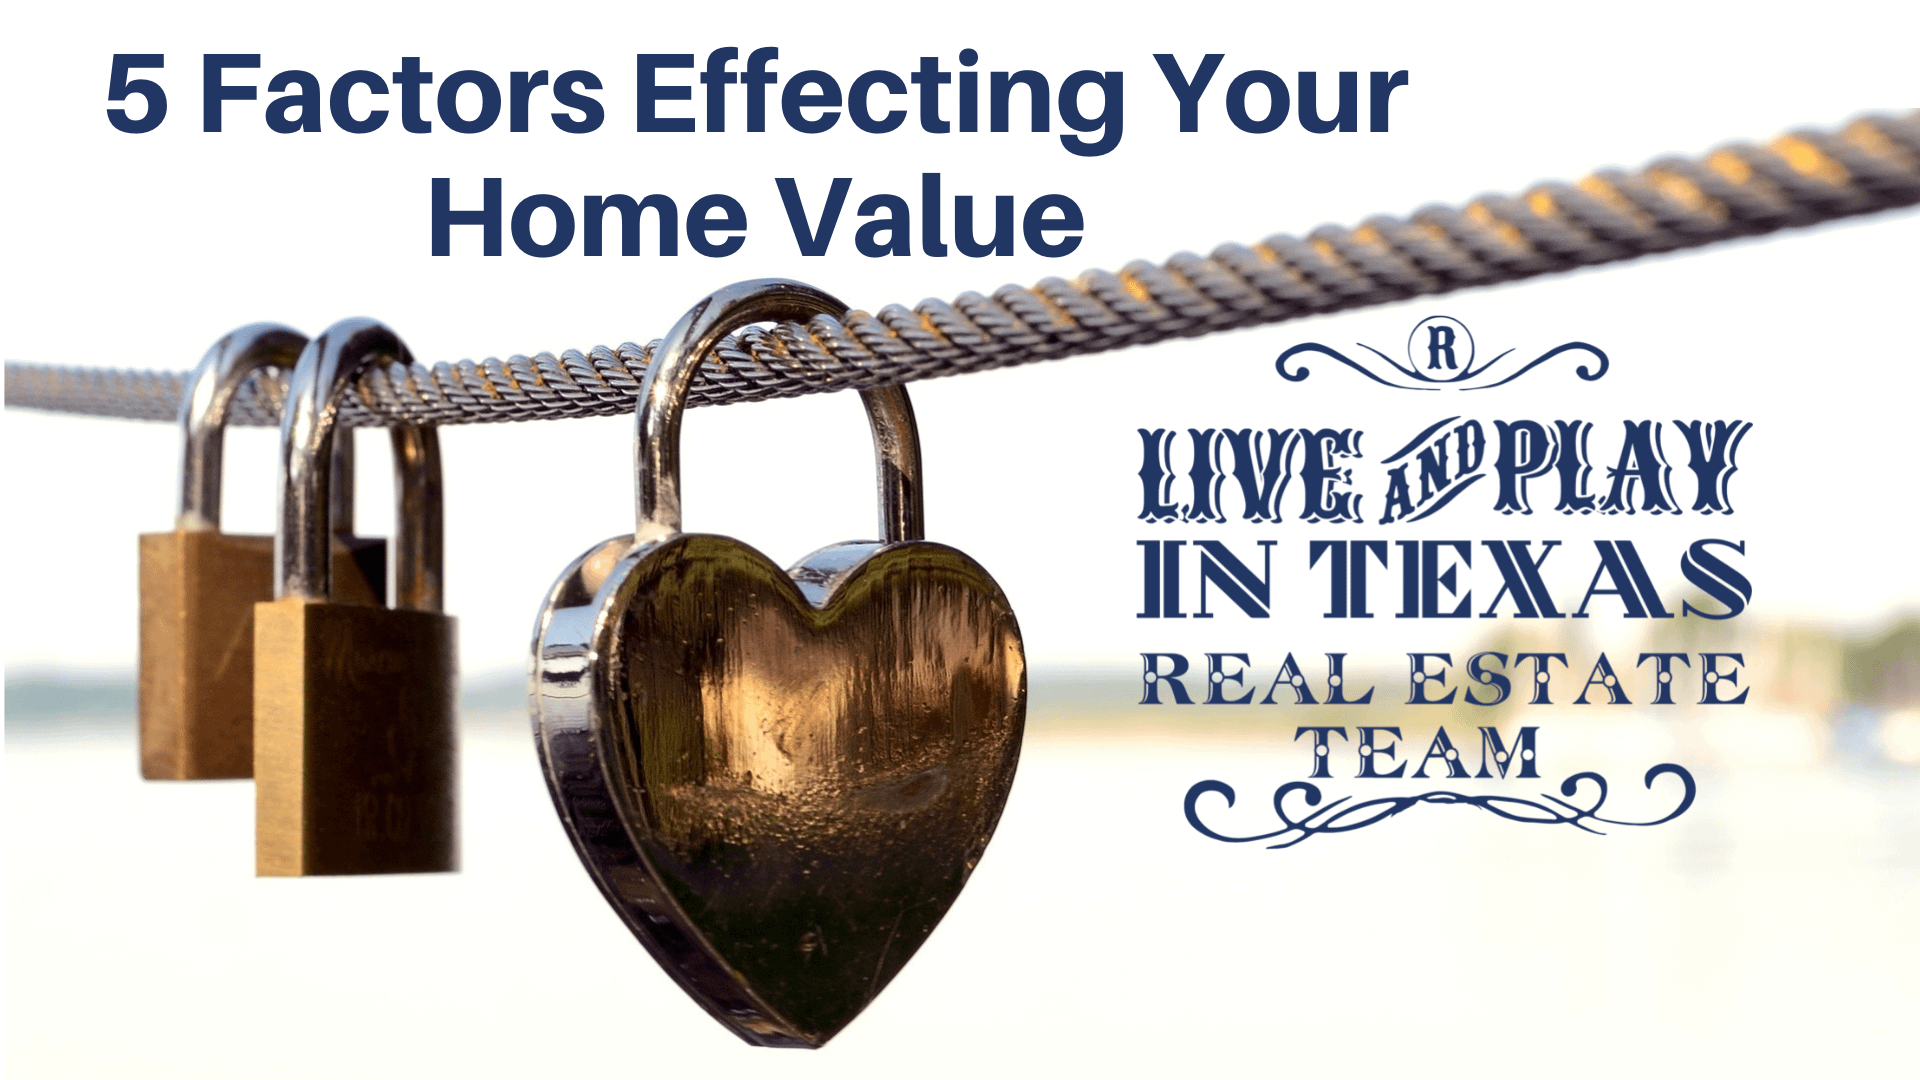 5 Factors Effecting Your Home Value